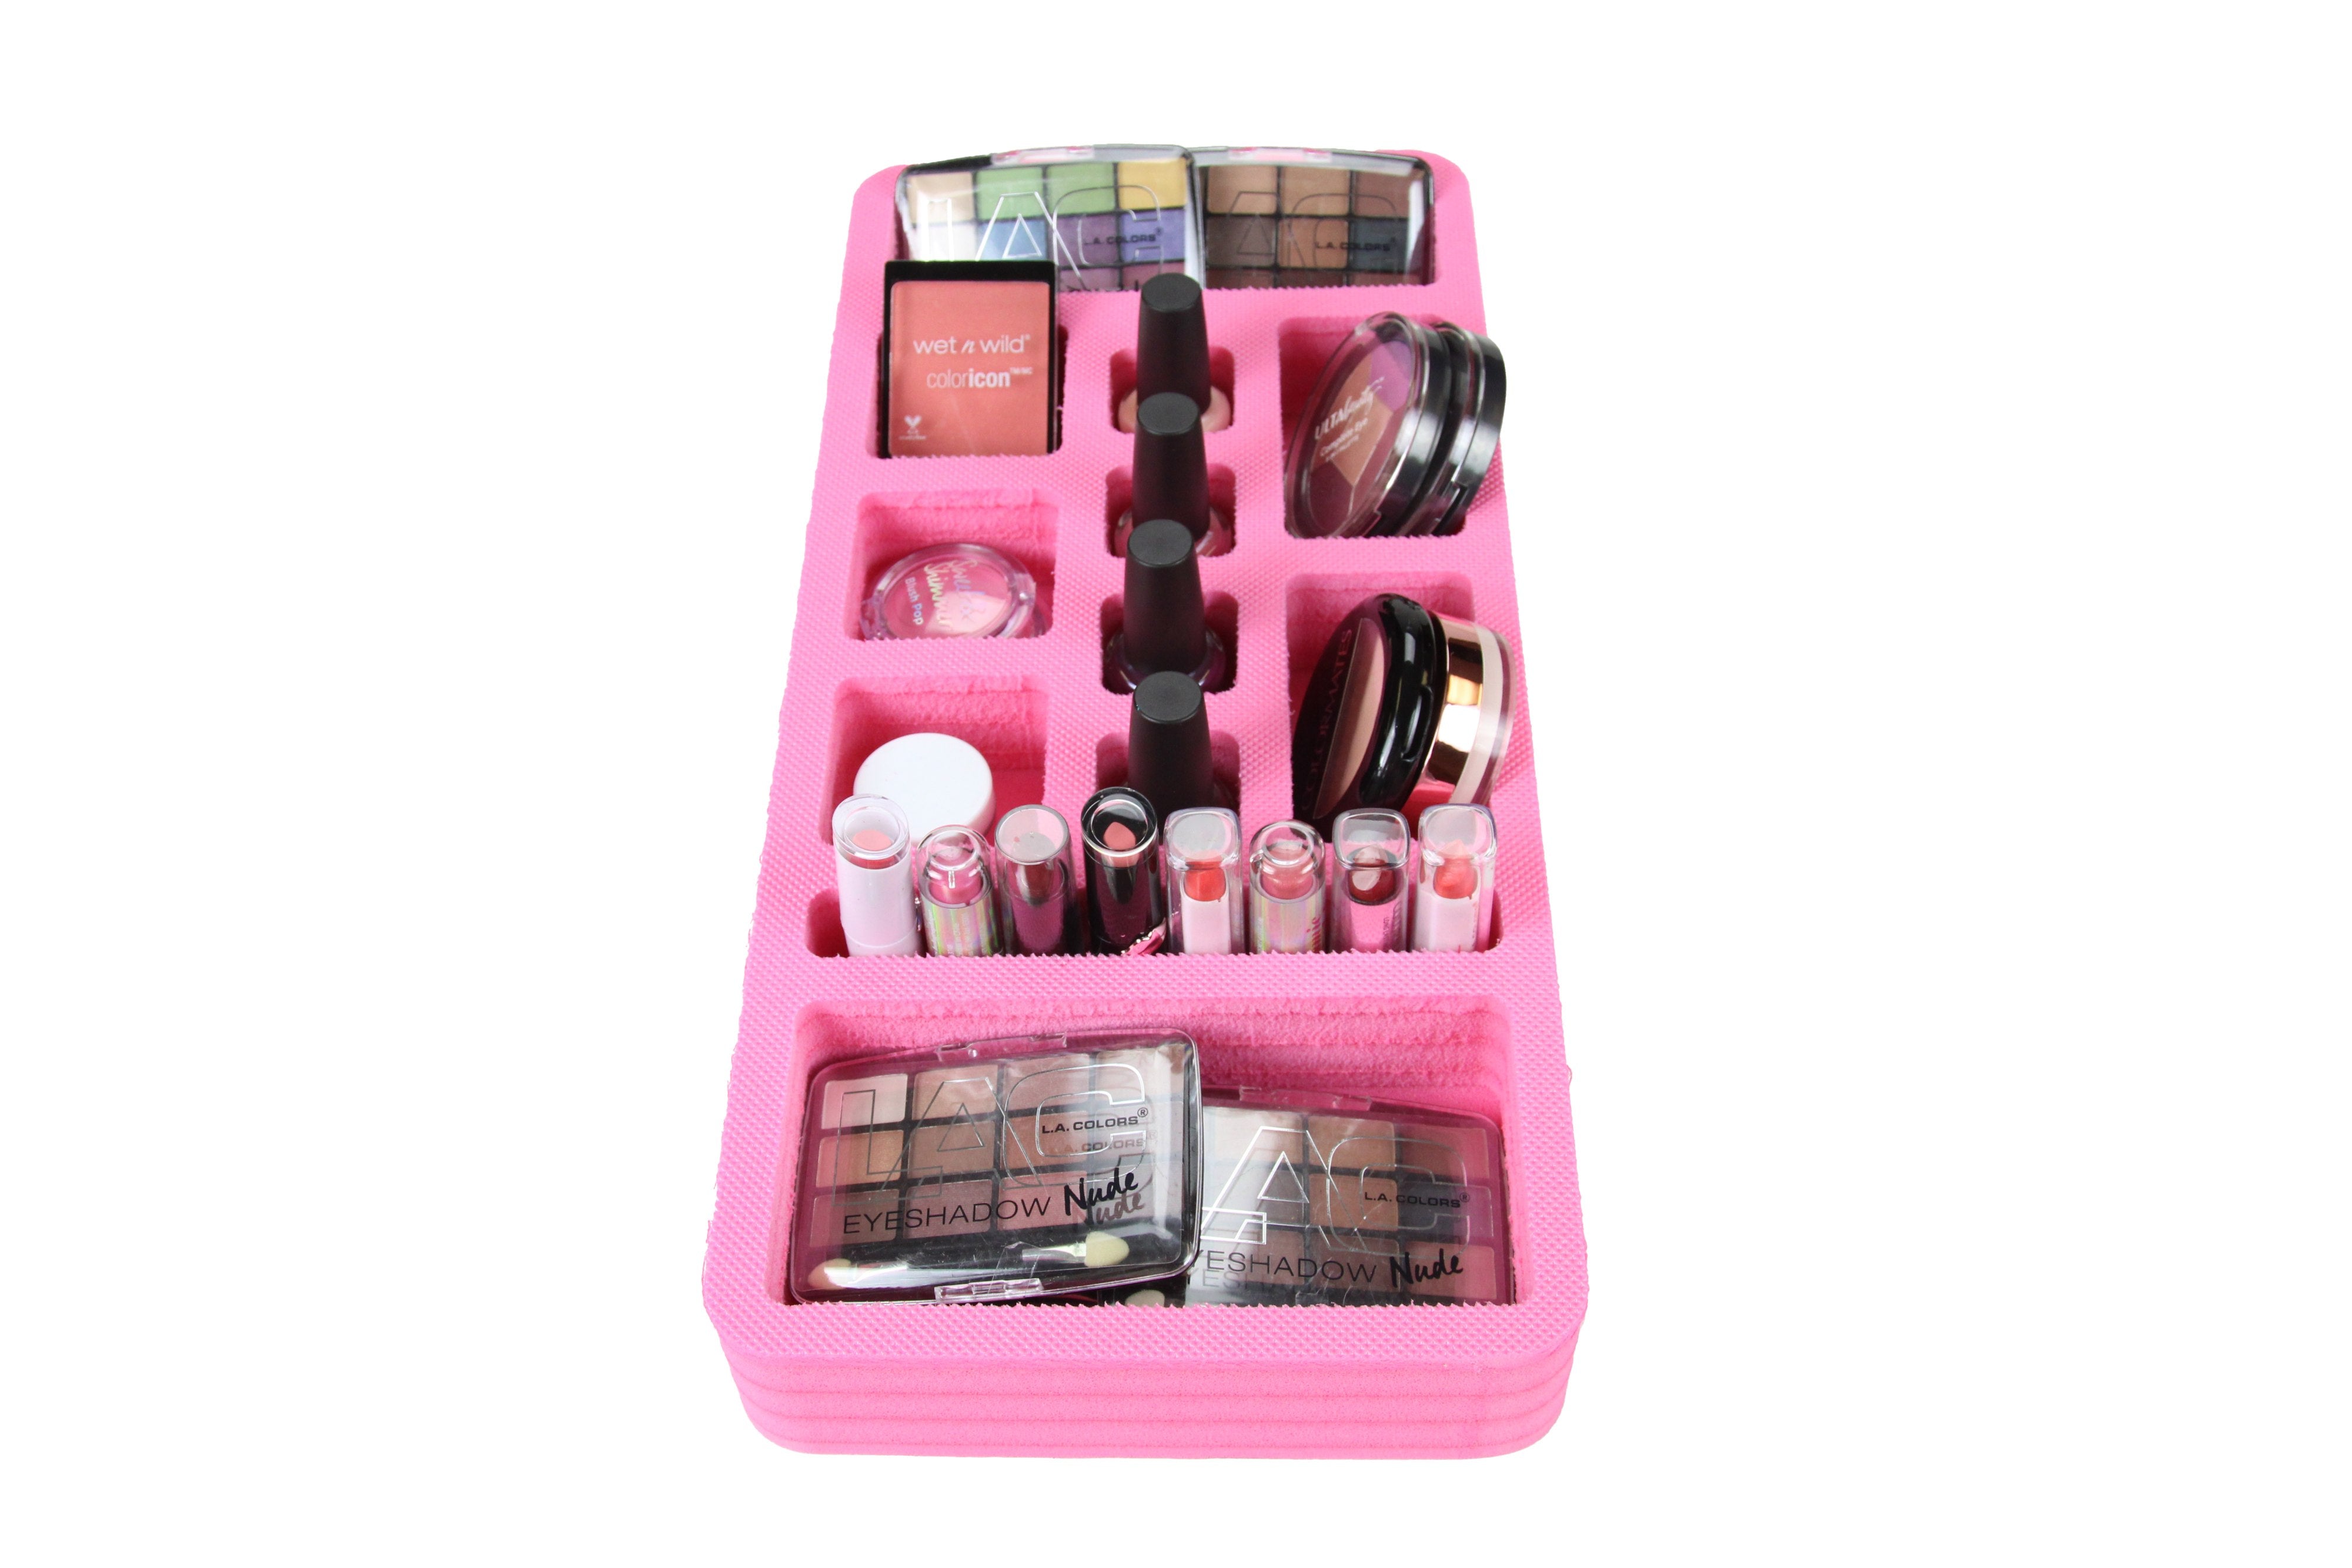 Makeup Drawer Tray Waterproof Durable Foam InsertHome Bathroom Bedroom Office 7.9 x 16.9 Inches 12 CompartmentsLipstick Eyeliner Cosmetics More